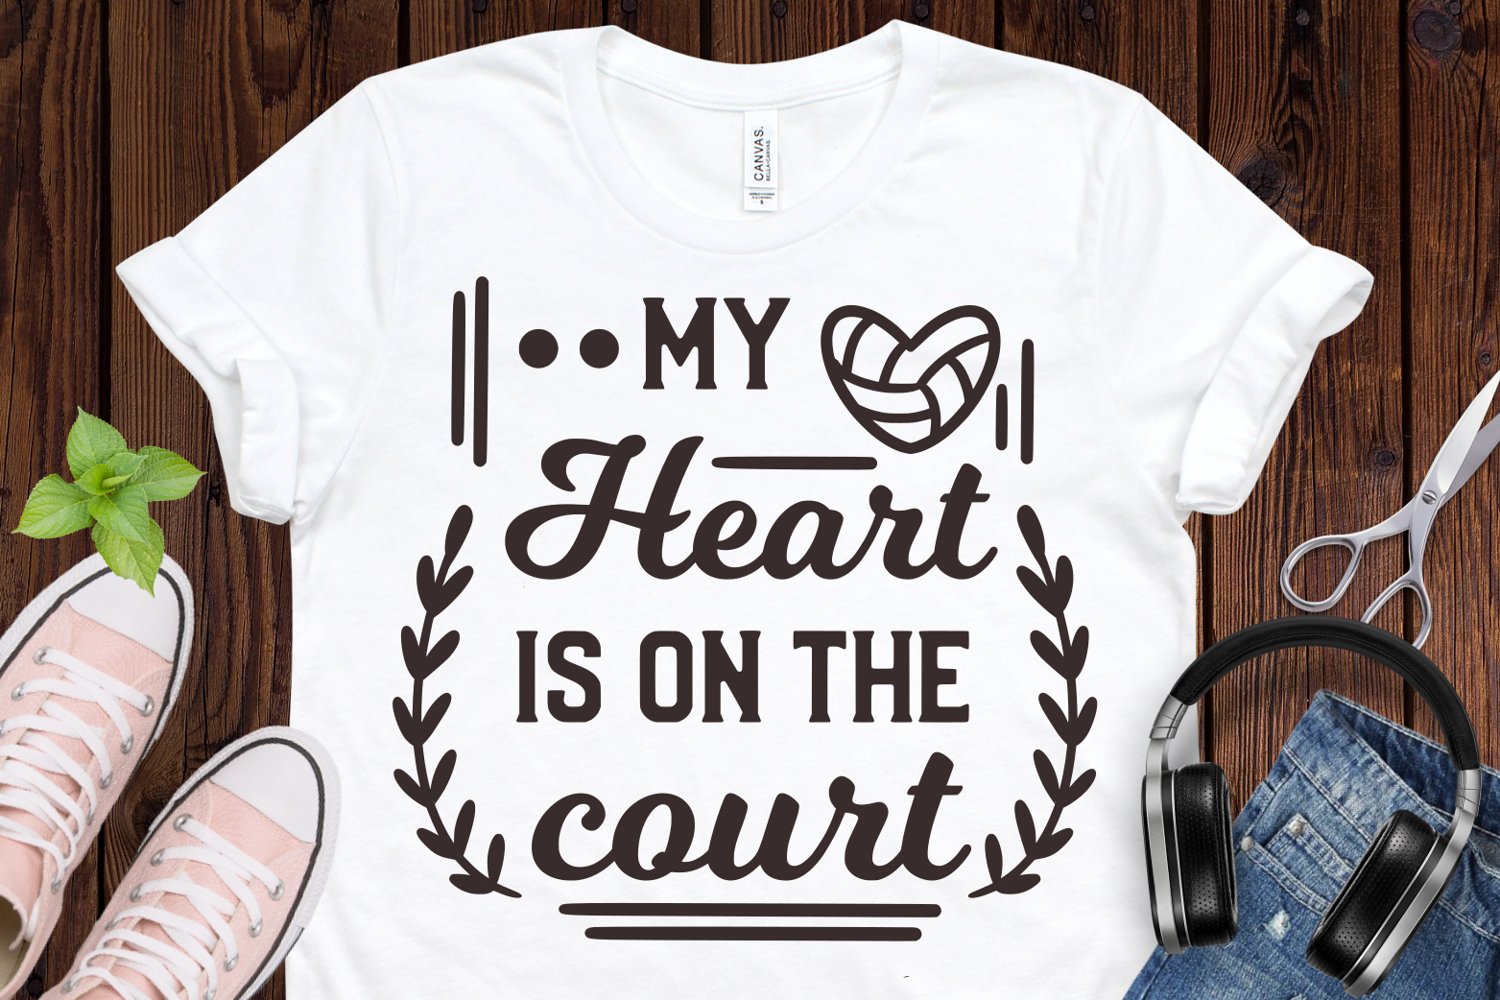 My heart is on the court - t-shirt design.